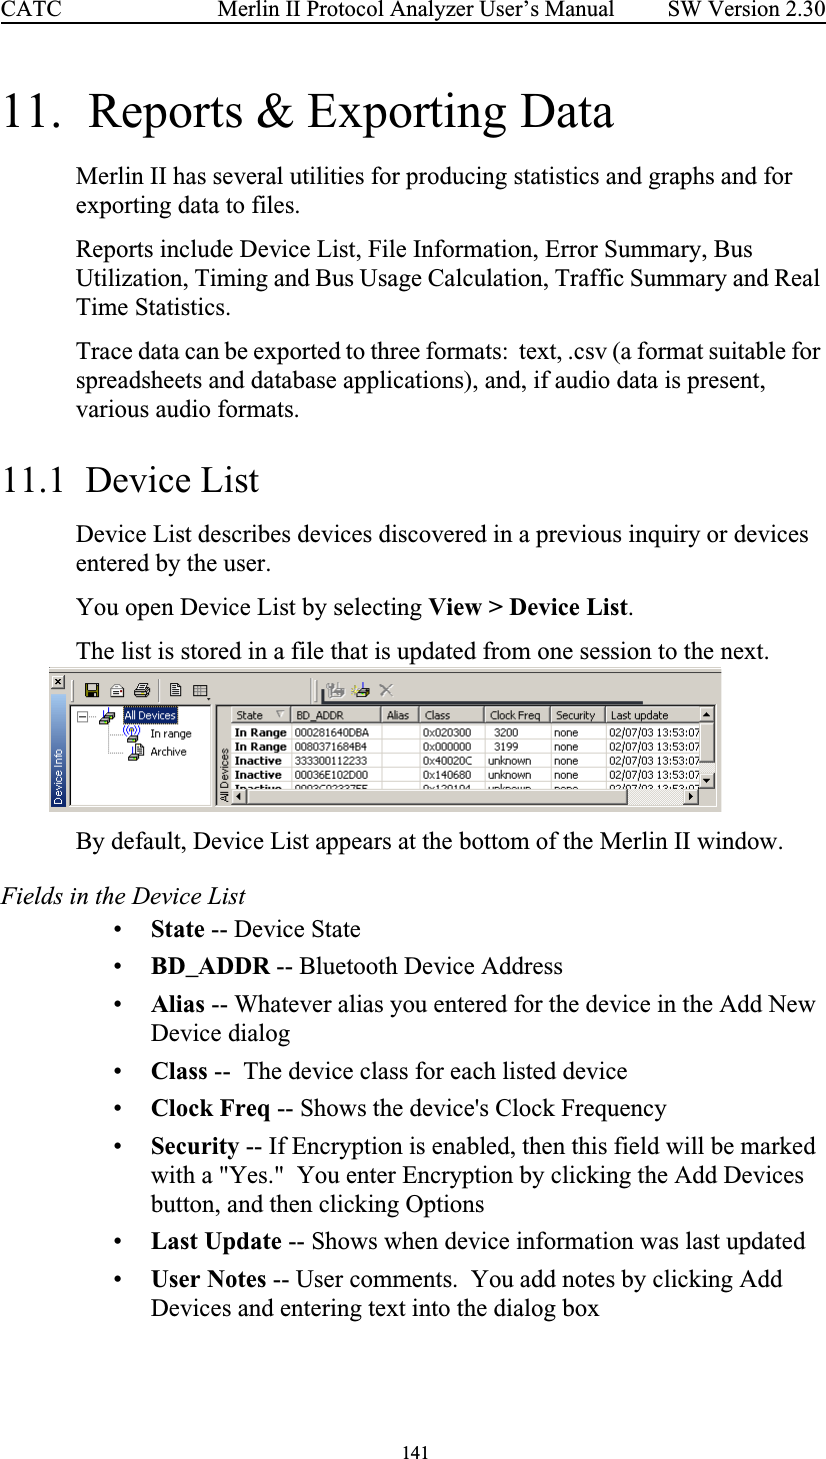  141 Merlin II Protocol Analyzer User’s ManualCATC SW Version 2.3011.  Reports &amp; Exporting DataMerlin II has several utilities for producing statistics and graphs and for exporting data to files.Reports include Device List, File Information, Error Summary, Bus Utilization, Timing and Bus Usage Calculation, Traffic Summary and Real Time Statistics.Trace data can be exported to three formats:  text, .csv (a format suitable for spreadsheets and database applications), and, if audio data is present, various audio formats.11.1  Device ListDevice List describes devices discovered in a previous inquiry or devices entered by the user. You open Device List by selecting View &gt; Device List.The list is stored in a file that is updated from one session to the next. By default, Device List appears at the bottom of the Merlin II window.  Fields in the Device List•State -- Device State•BD_ADDR -- Bluetooth Device Address•Alias -- Whatever alias you entered for the device in the Add New Device dialog•Class --  The device class for each listed device•Clock Freq -- Shows the device&apos;s Clock Frequency•Security -- If Encryption is enabled, then this field will be marked with a &quot;Yes.&quot;  You enter Encryption by clicking the Add Devices button, and then clicking Options•Last Update -- Shows when device information was last updated•User Notes -- User comments.  You add notes by clicking Add Devices and entering text into the dialog box